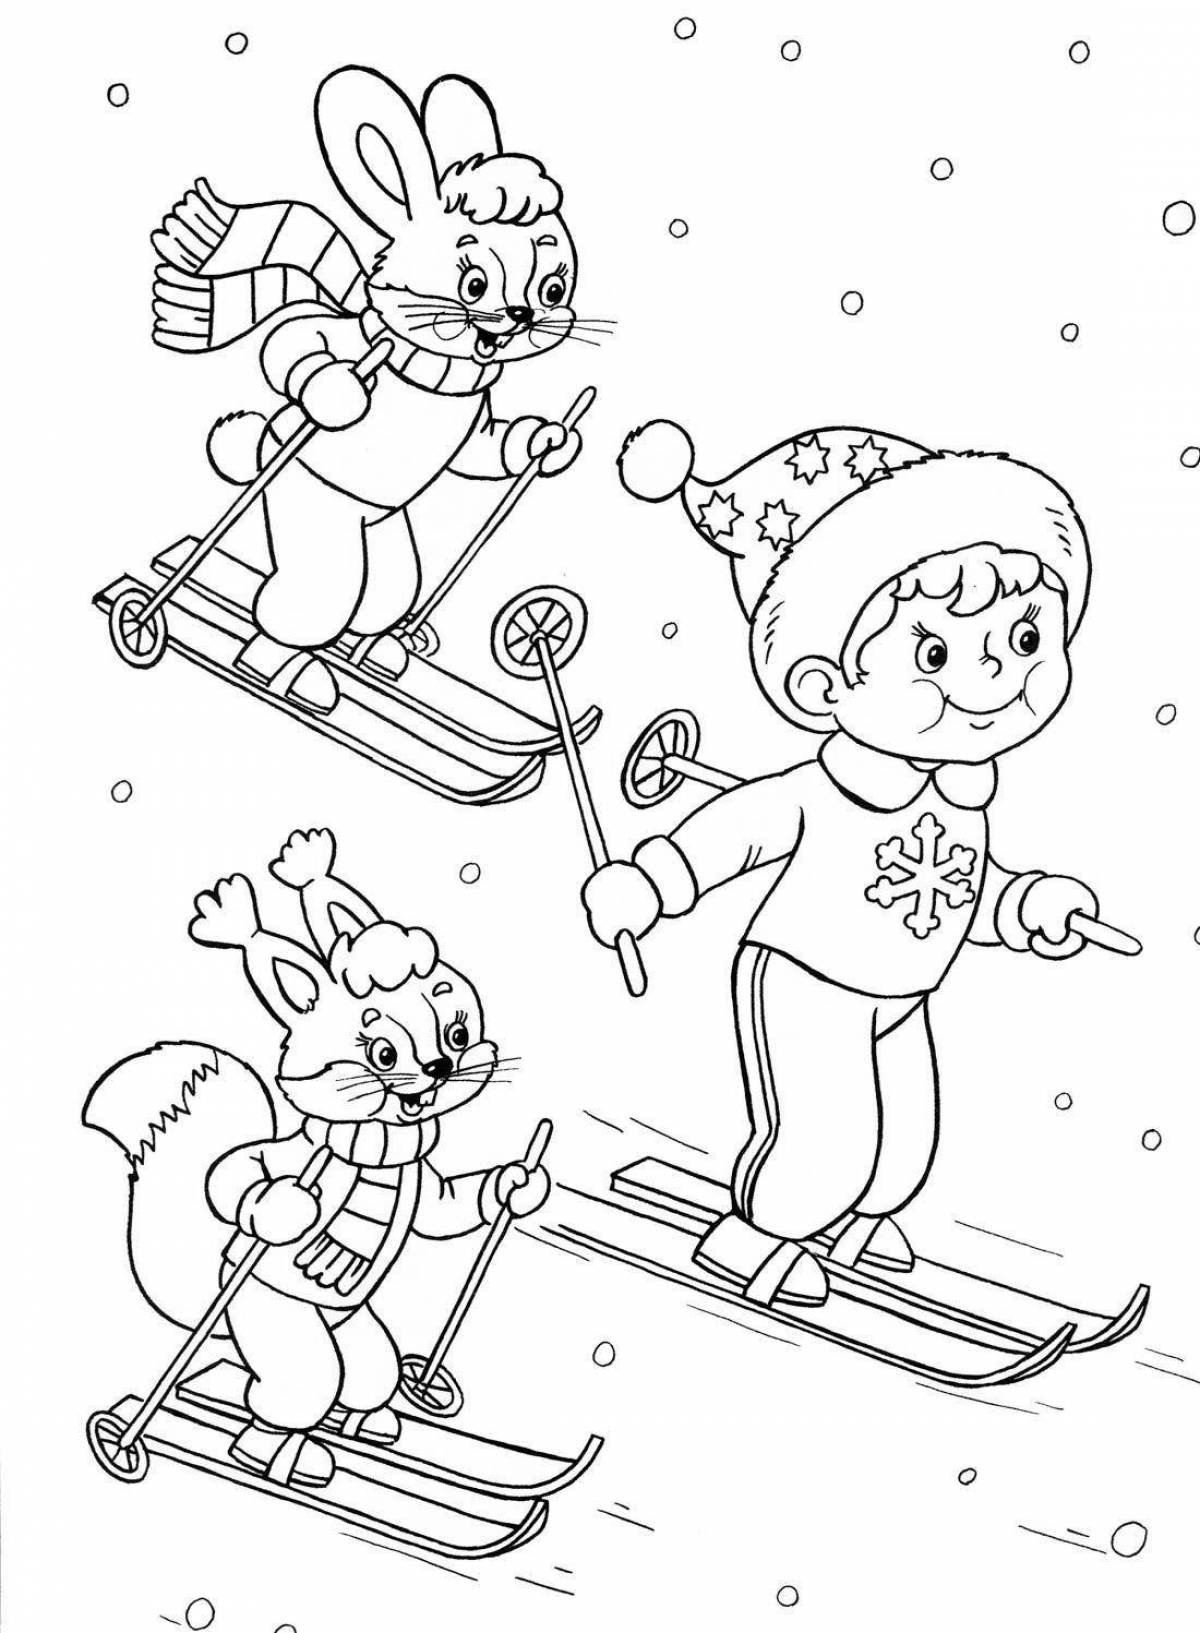 Glowing winter sports coloring book